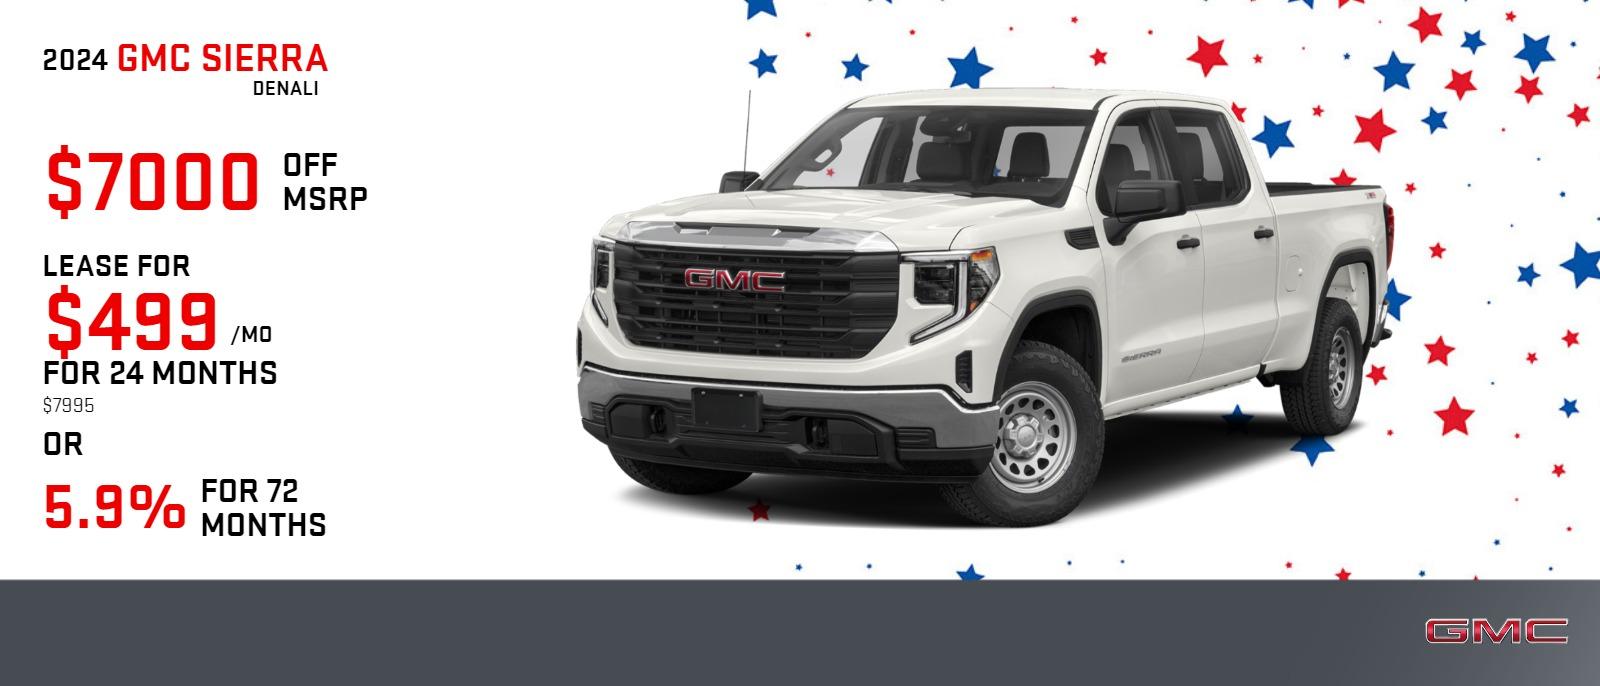 2024 GMC SIERRA 1500 DENALI 
$499 | 24 MONTHS | $7995
SAVE UP TO $7000 OFF MSRP
5.9% APR FOR UP TO 72 MONTHS